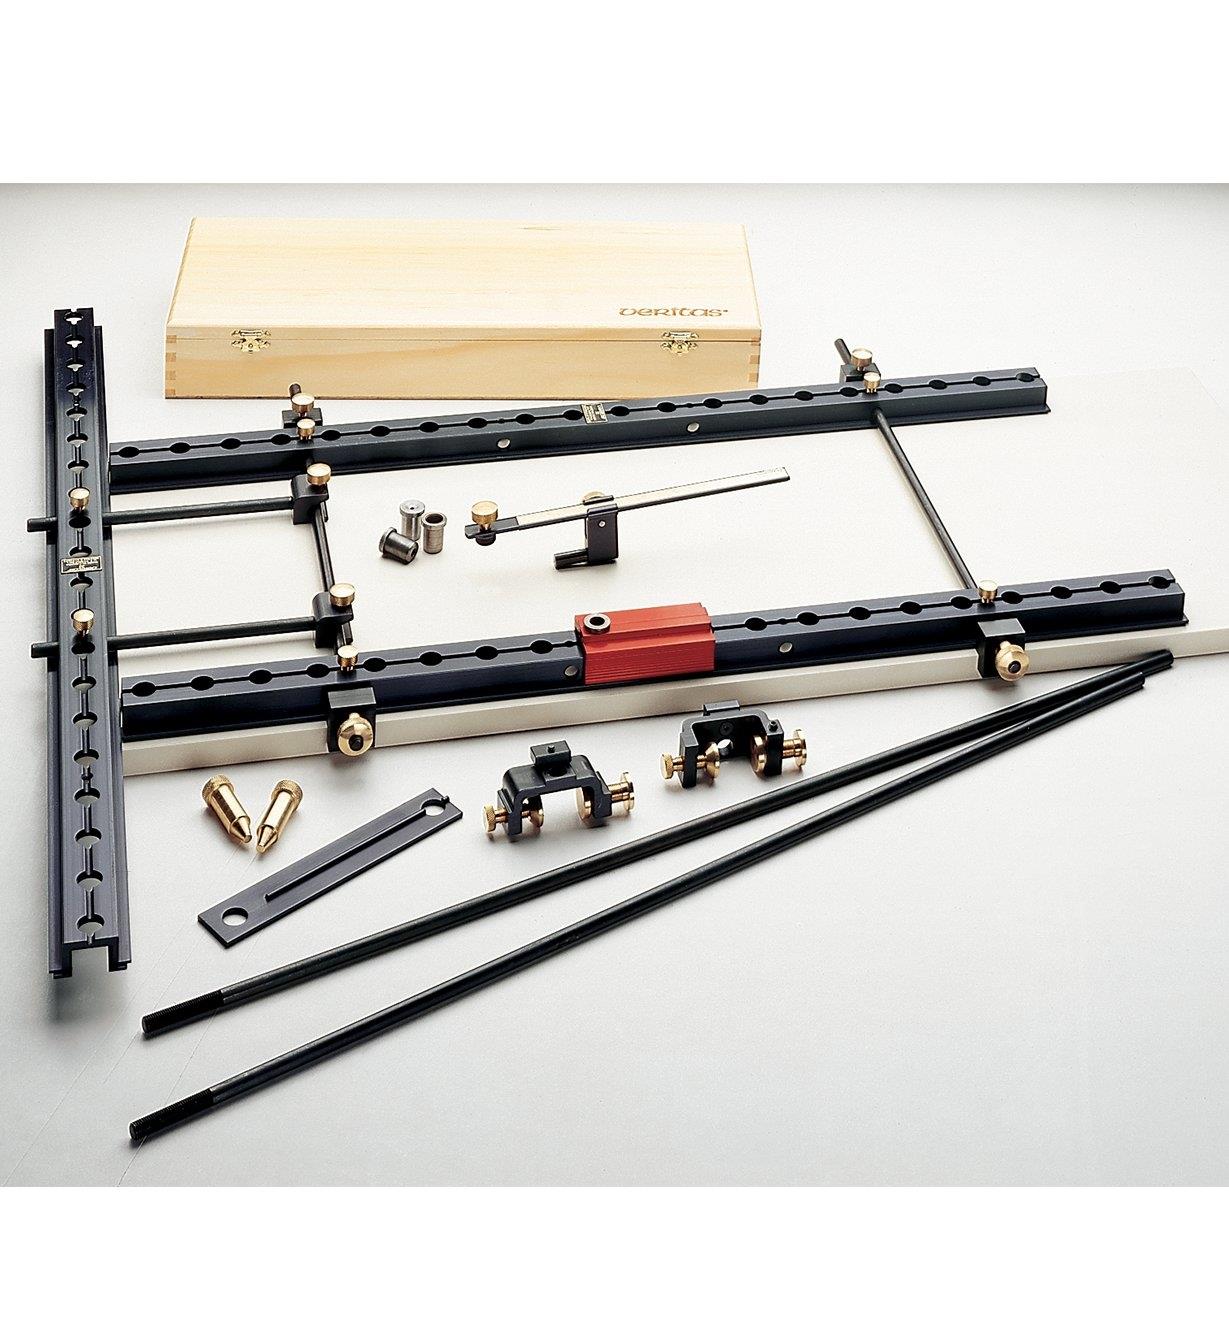 Components for the Veritas 32 Cabinetmaking System